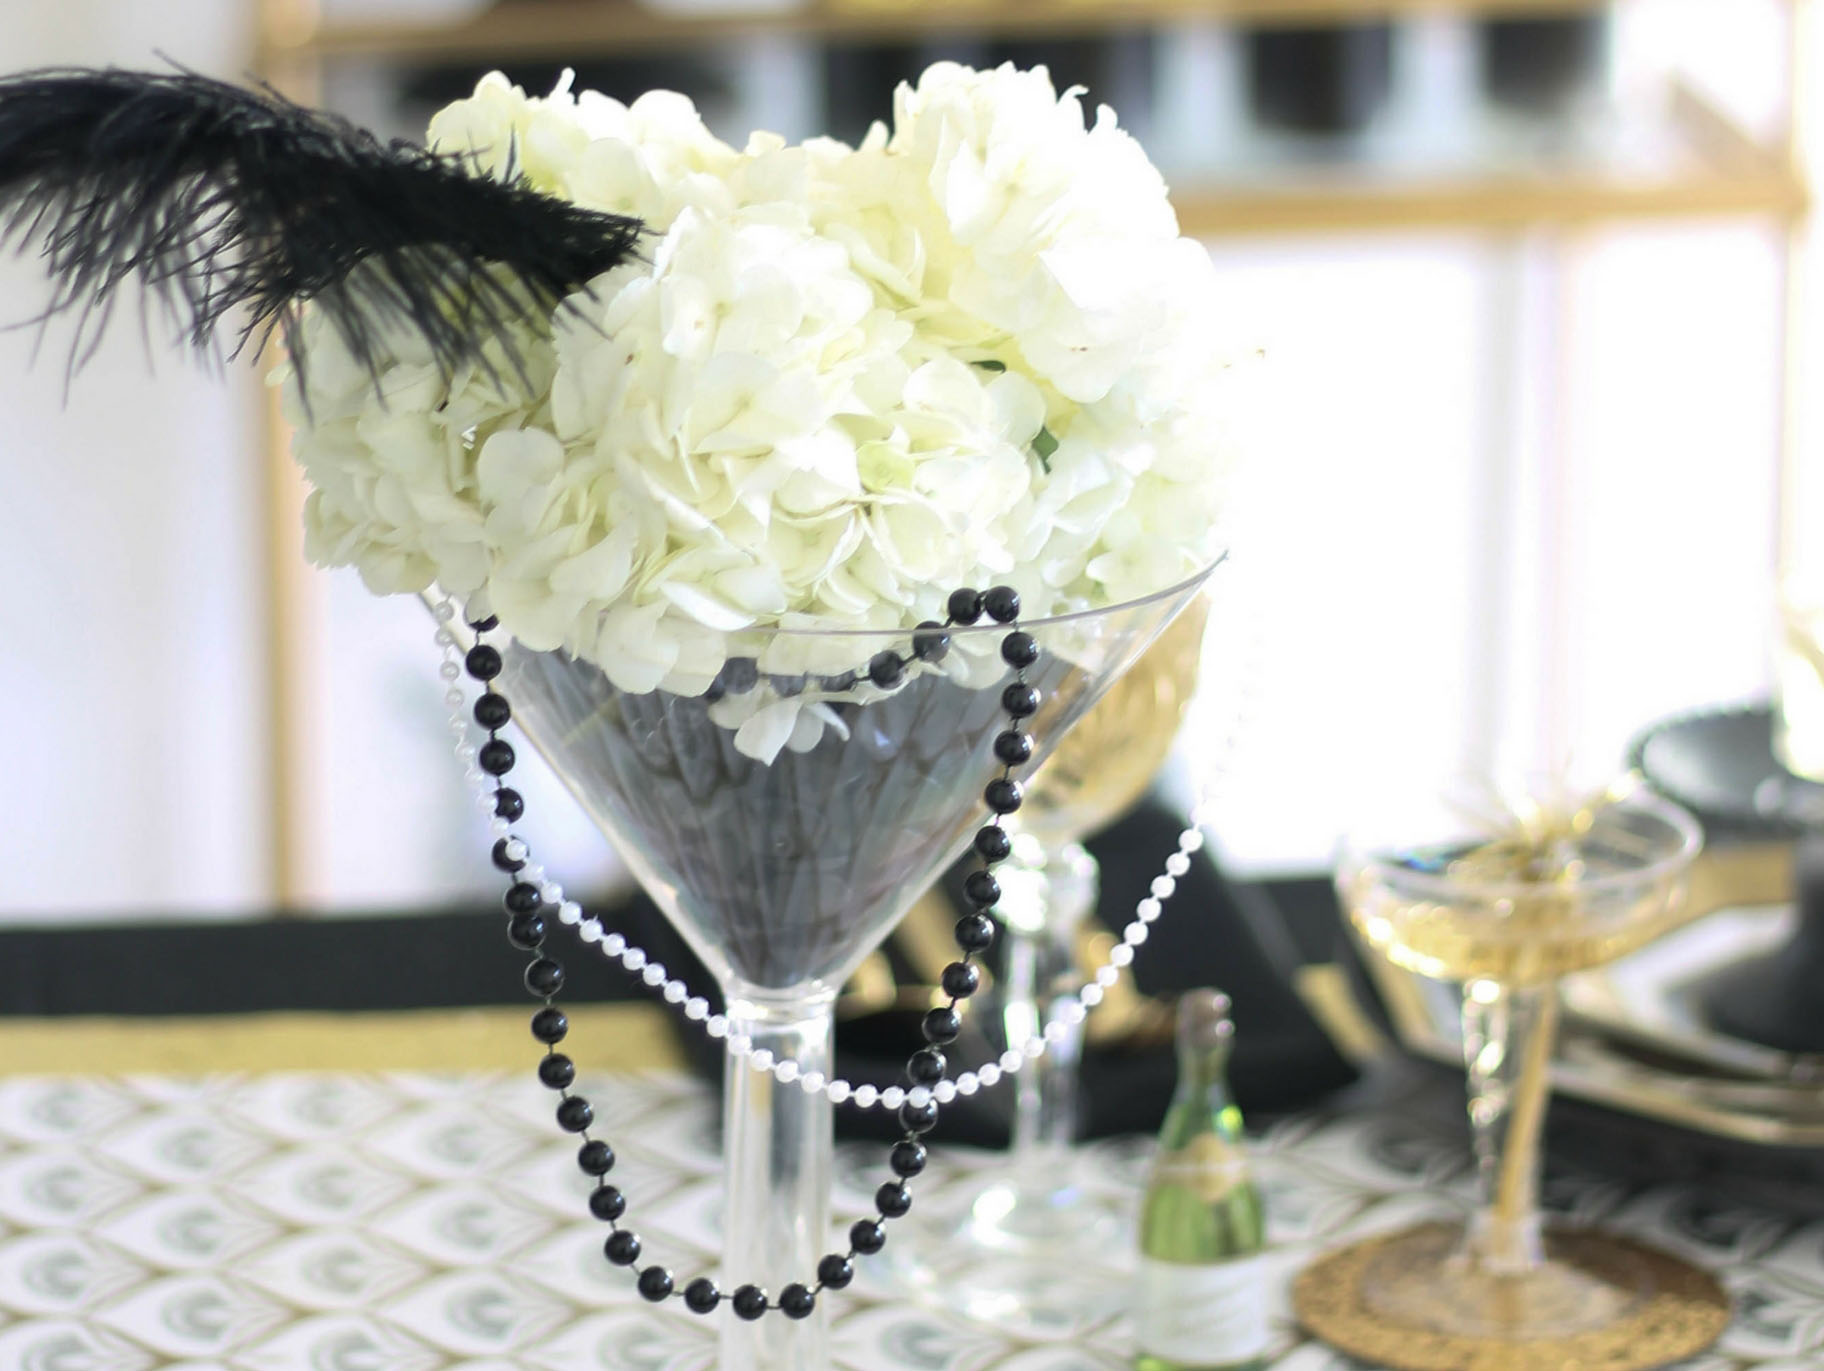 martini glass wedding table decor flowers gift idea home party decor select size 